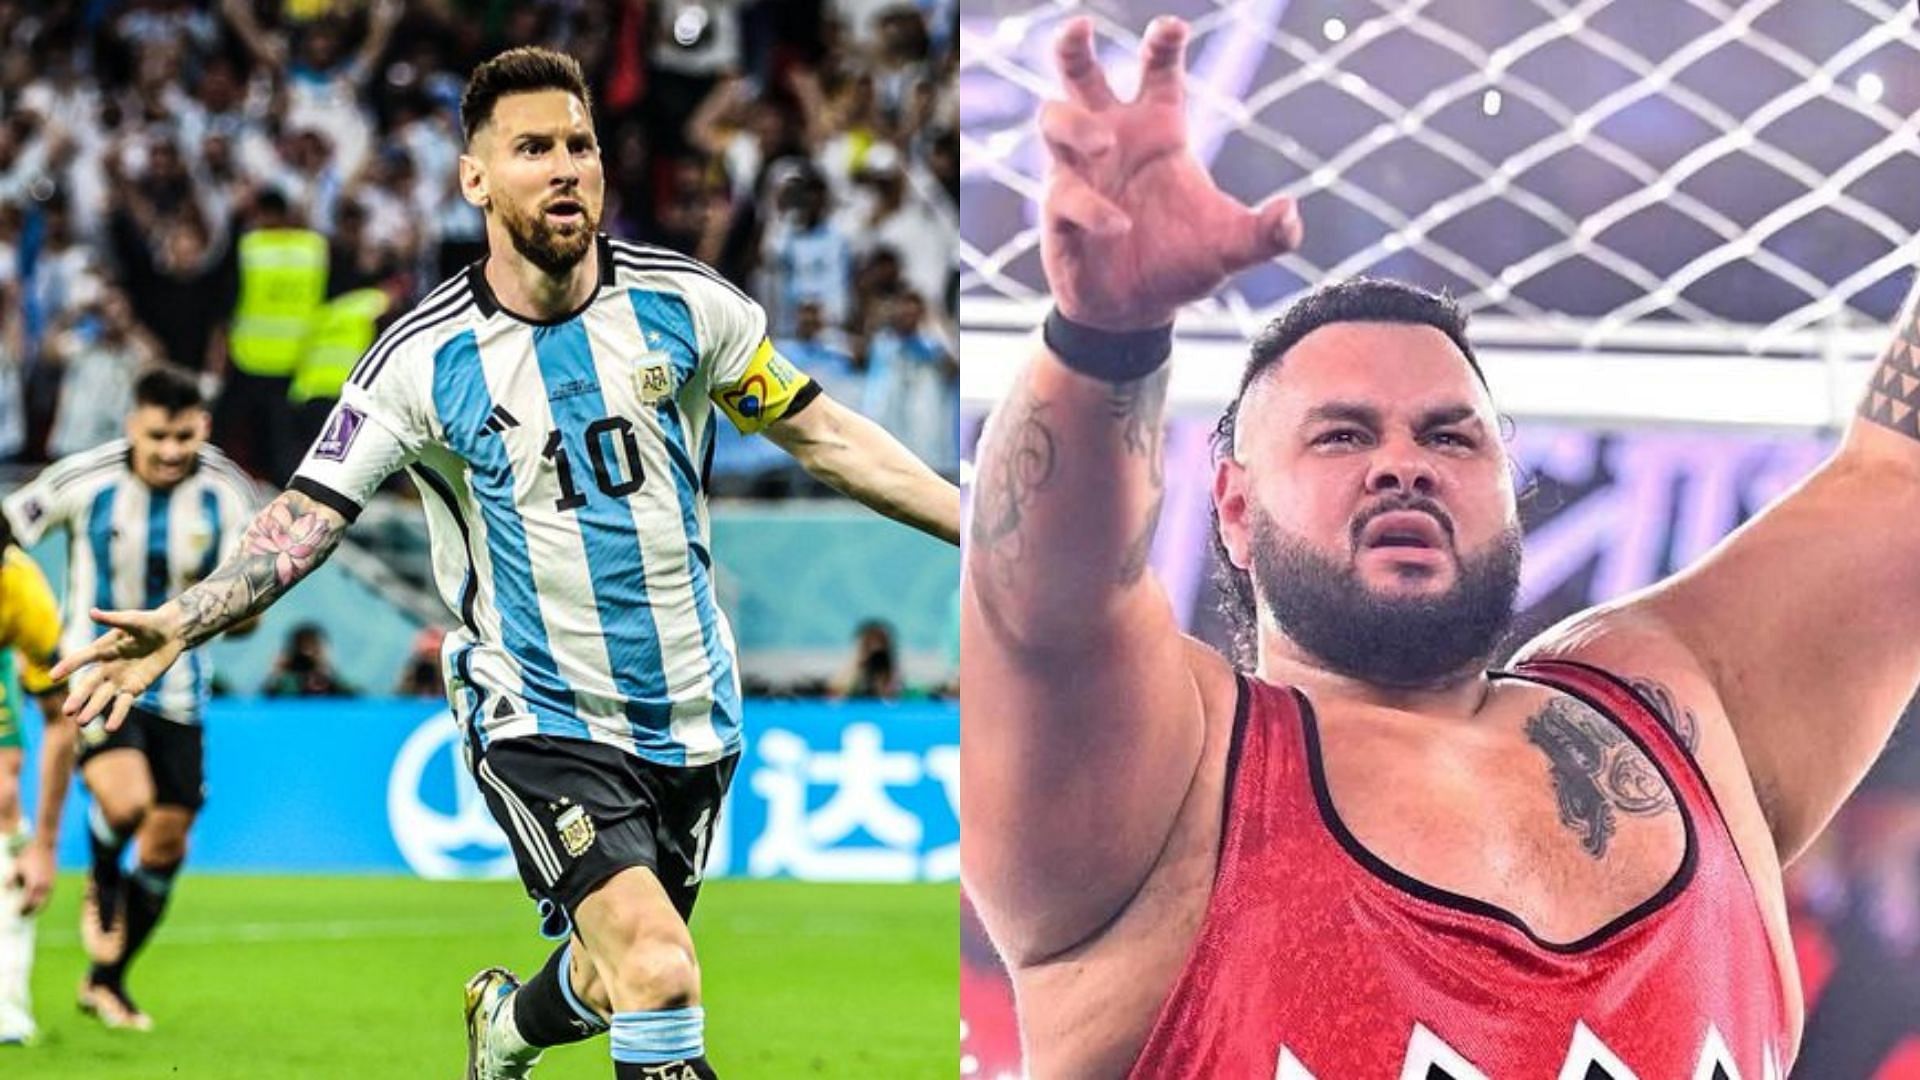 Jonah took a dig at Lionel Messi while showing support for Australia